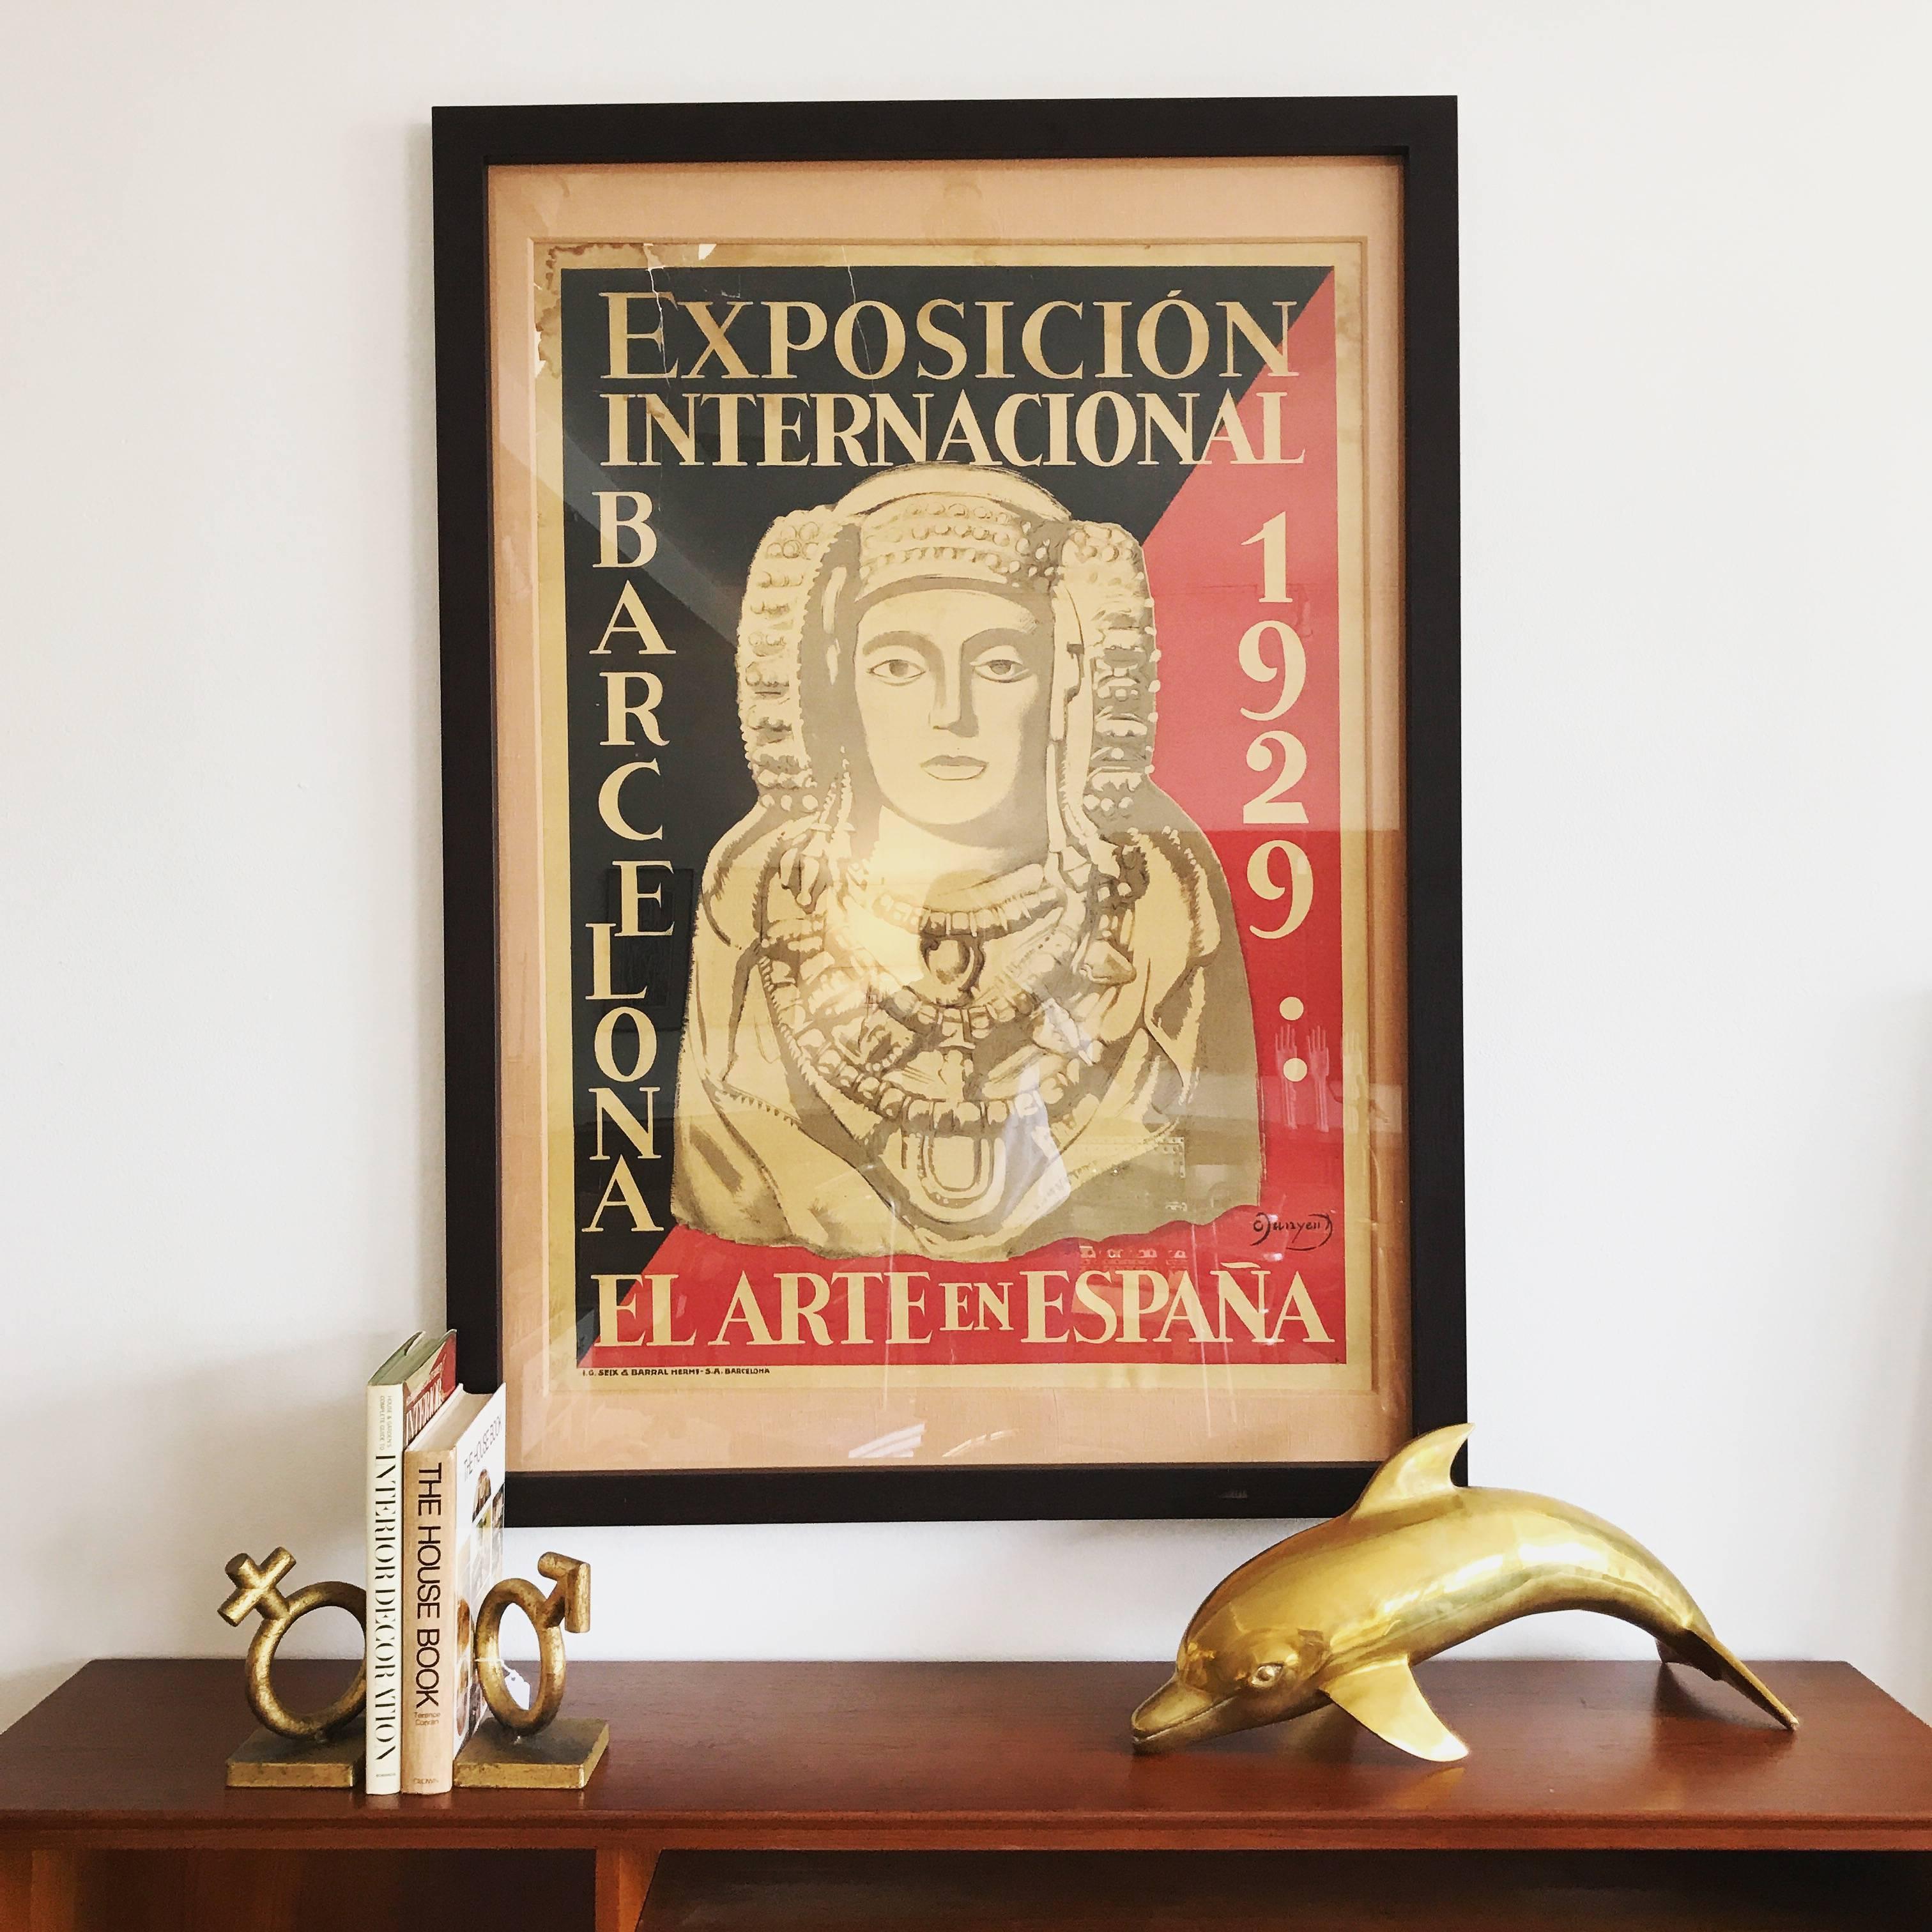 Original World's Fair Poster from Barcelona, 1929 by Oleg Junyent titled El Arte en España, representing the Lady of Elche (a stone bust from the Fourth century BC that was discovered by chance in 1897 at L'Alcúdia, near Alicante, in an ancient